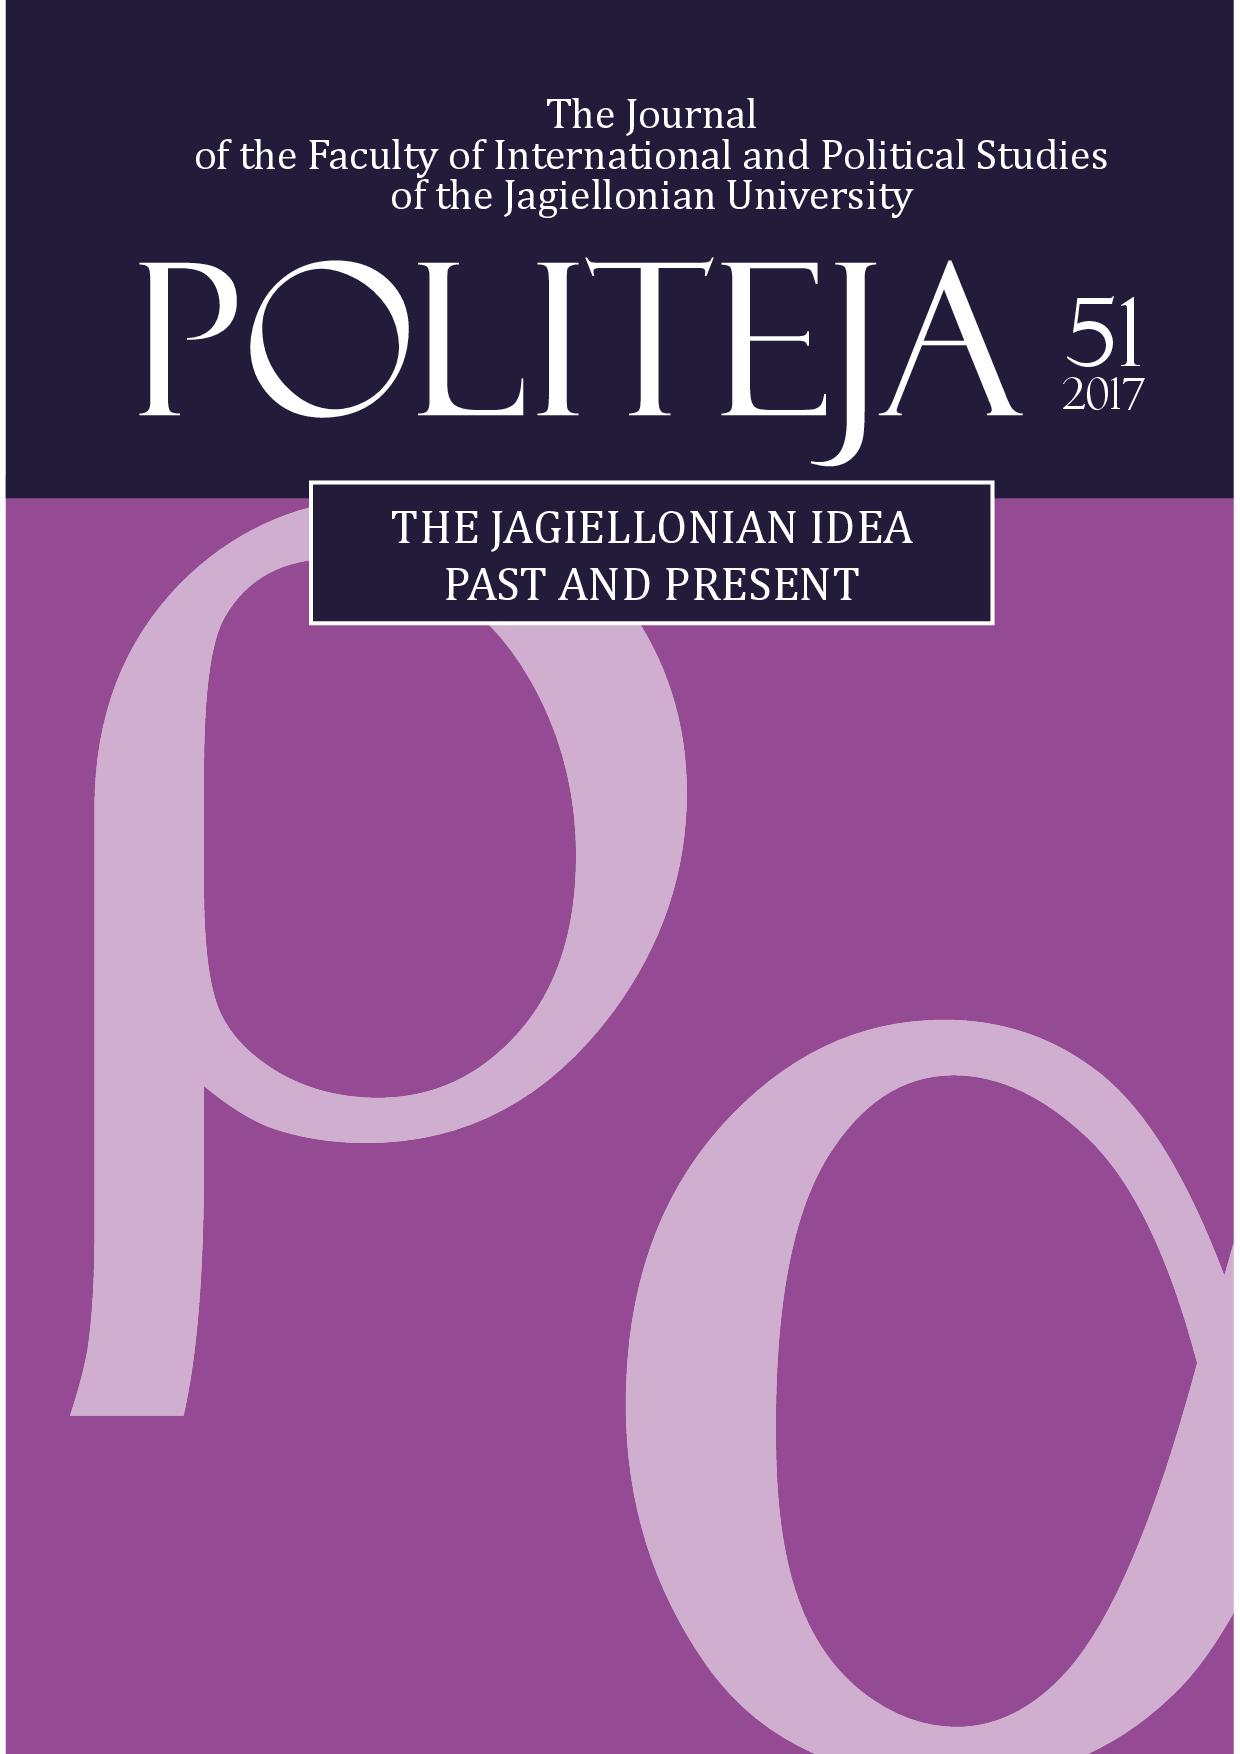 The Federal Idea in Poland in the Interwar Period: Idealism or Pragmatism? Cover Image